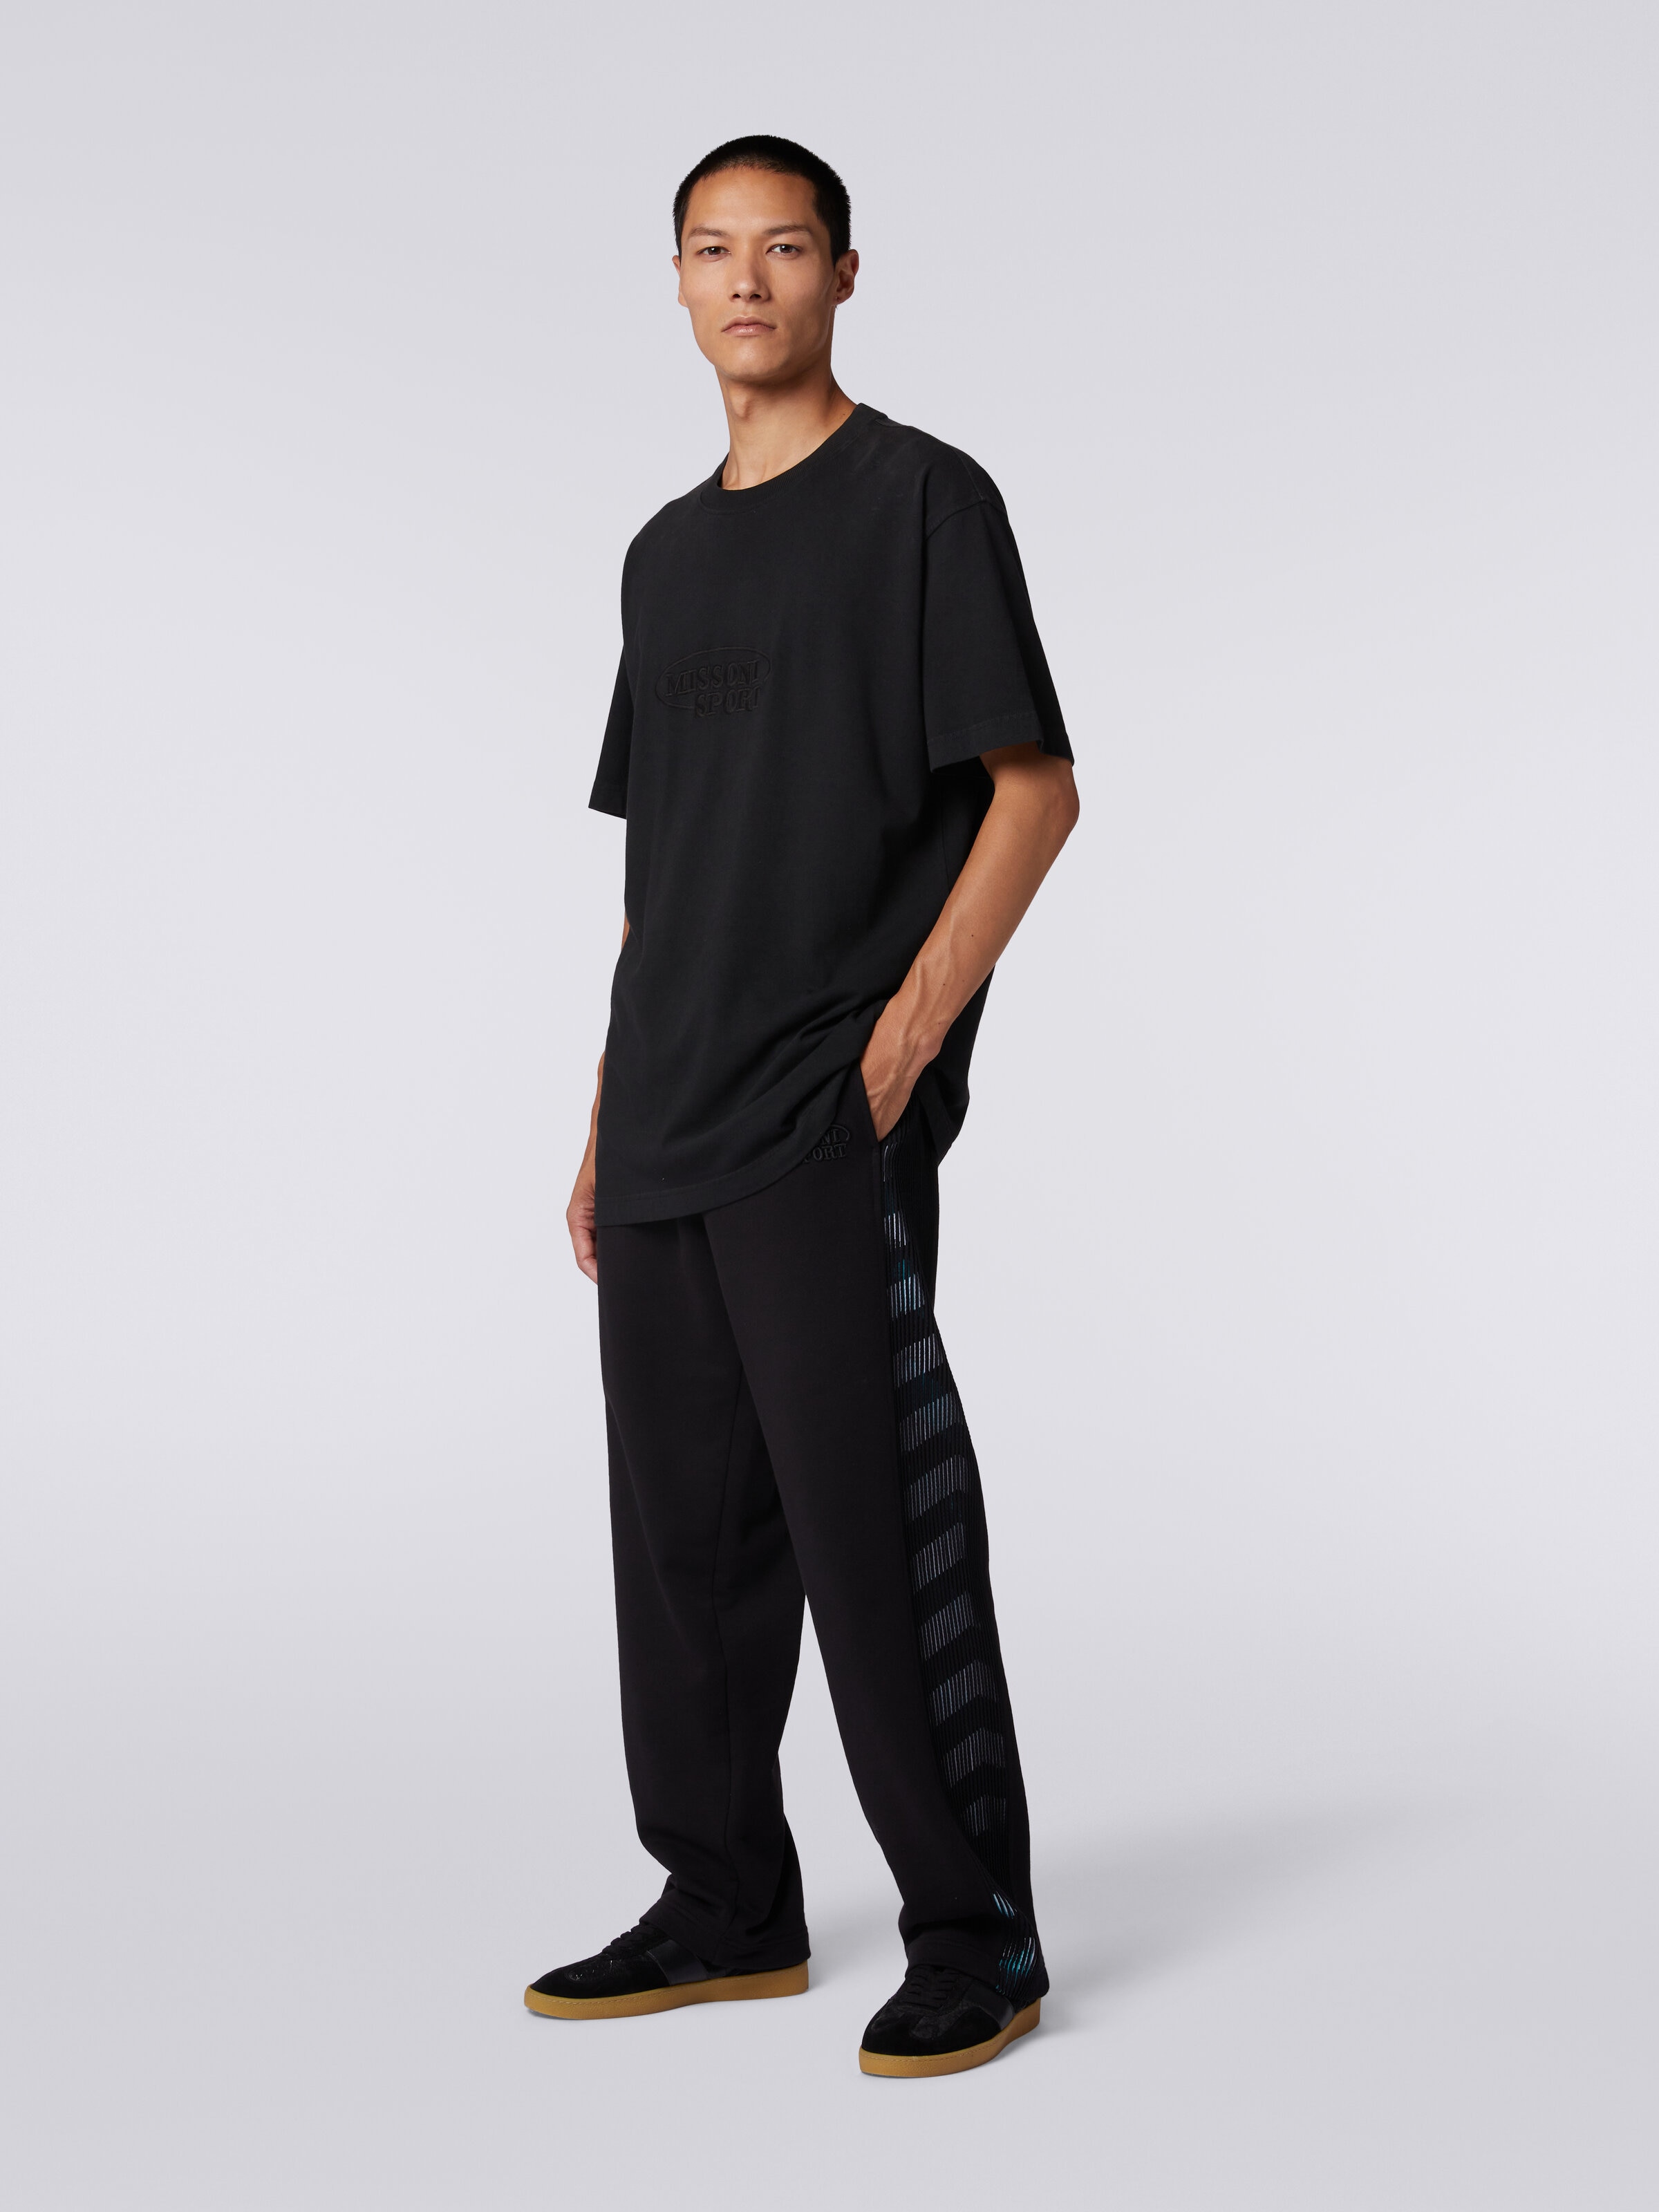 Trousers in fleece with logo and knitted side bands, Black    - 2